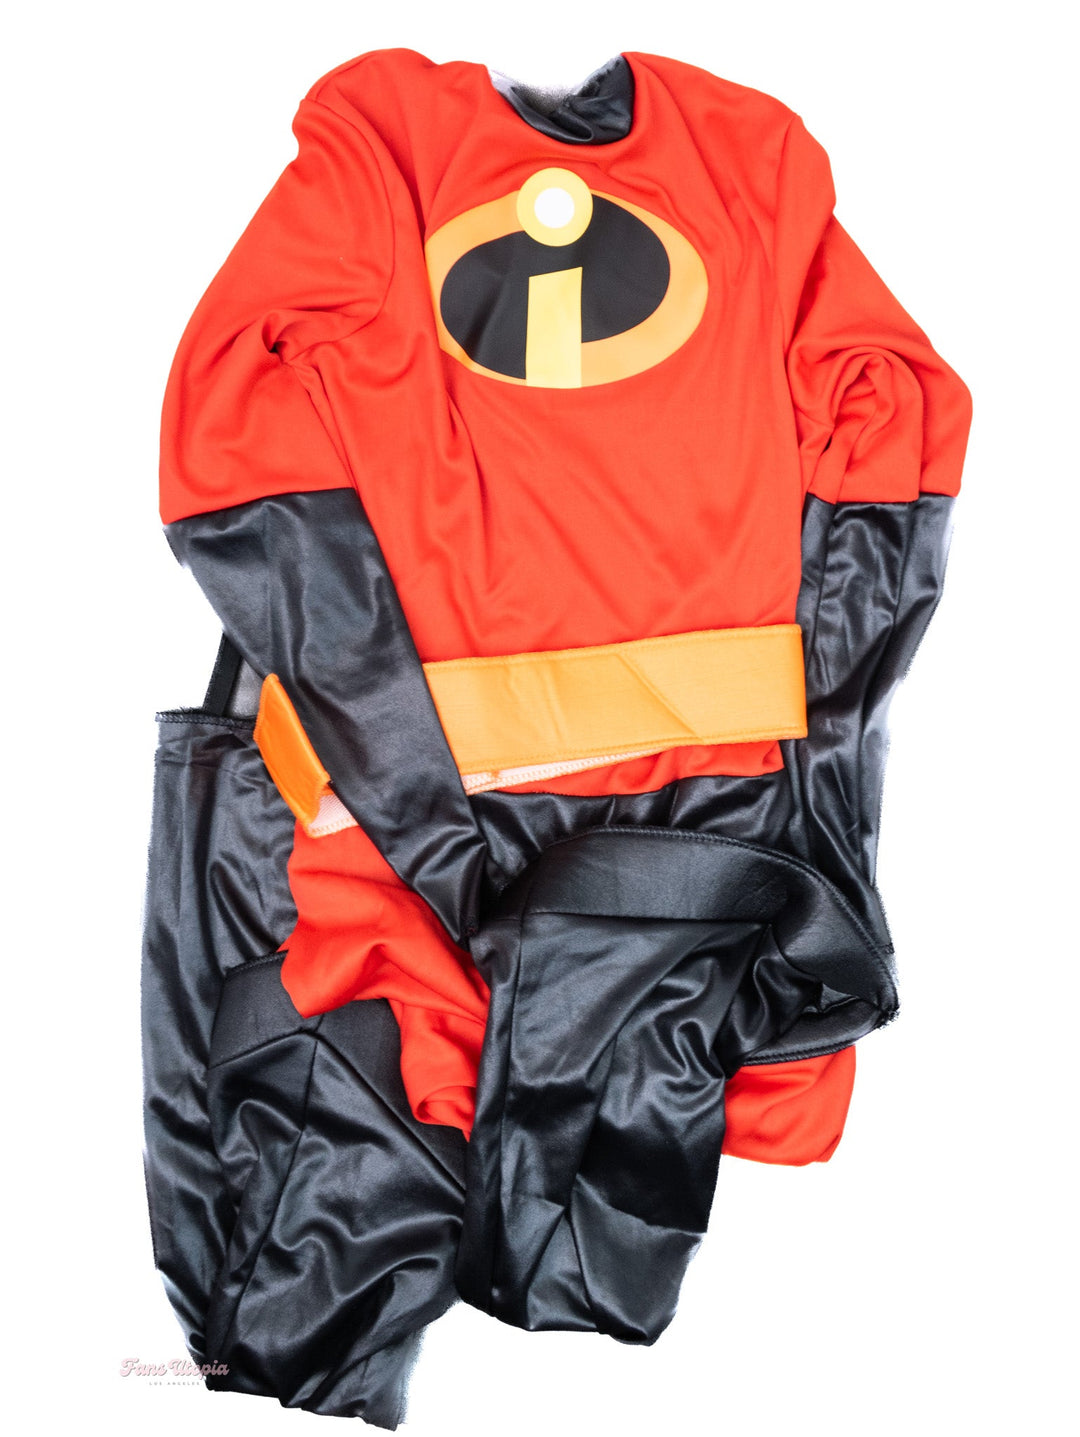 Lena The Plug The Incredibles Cosplay Outfit